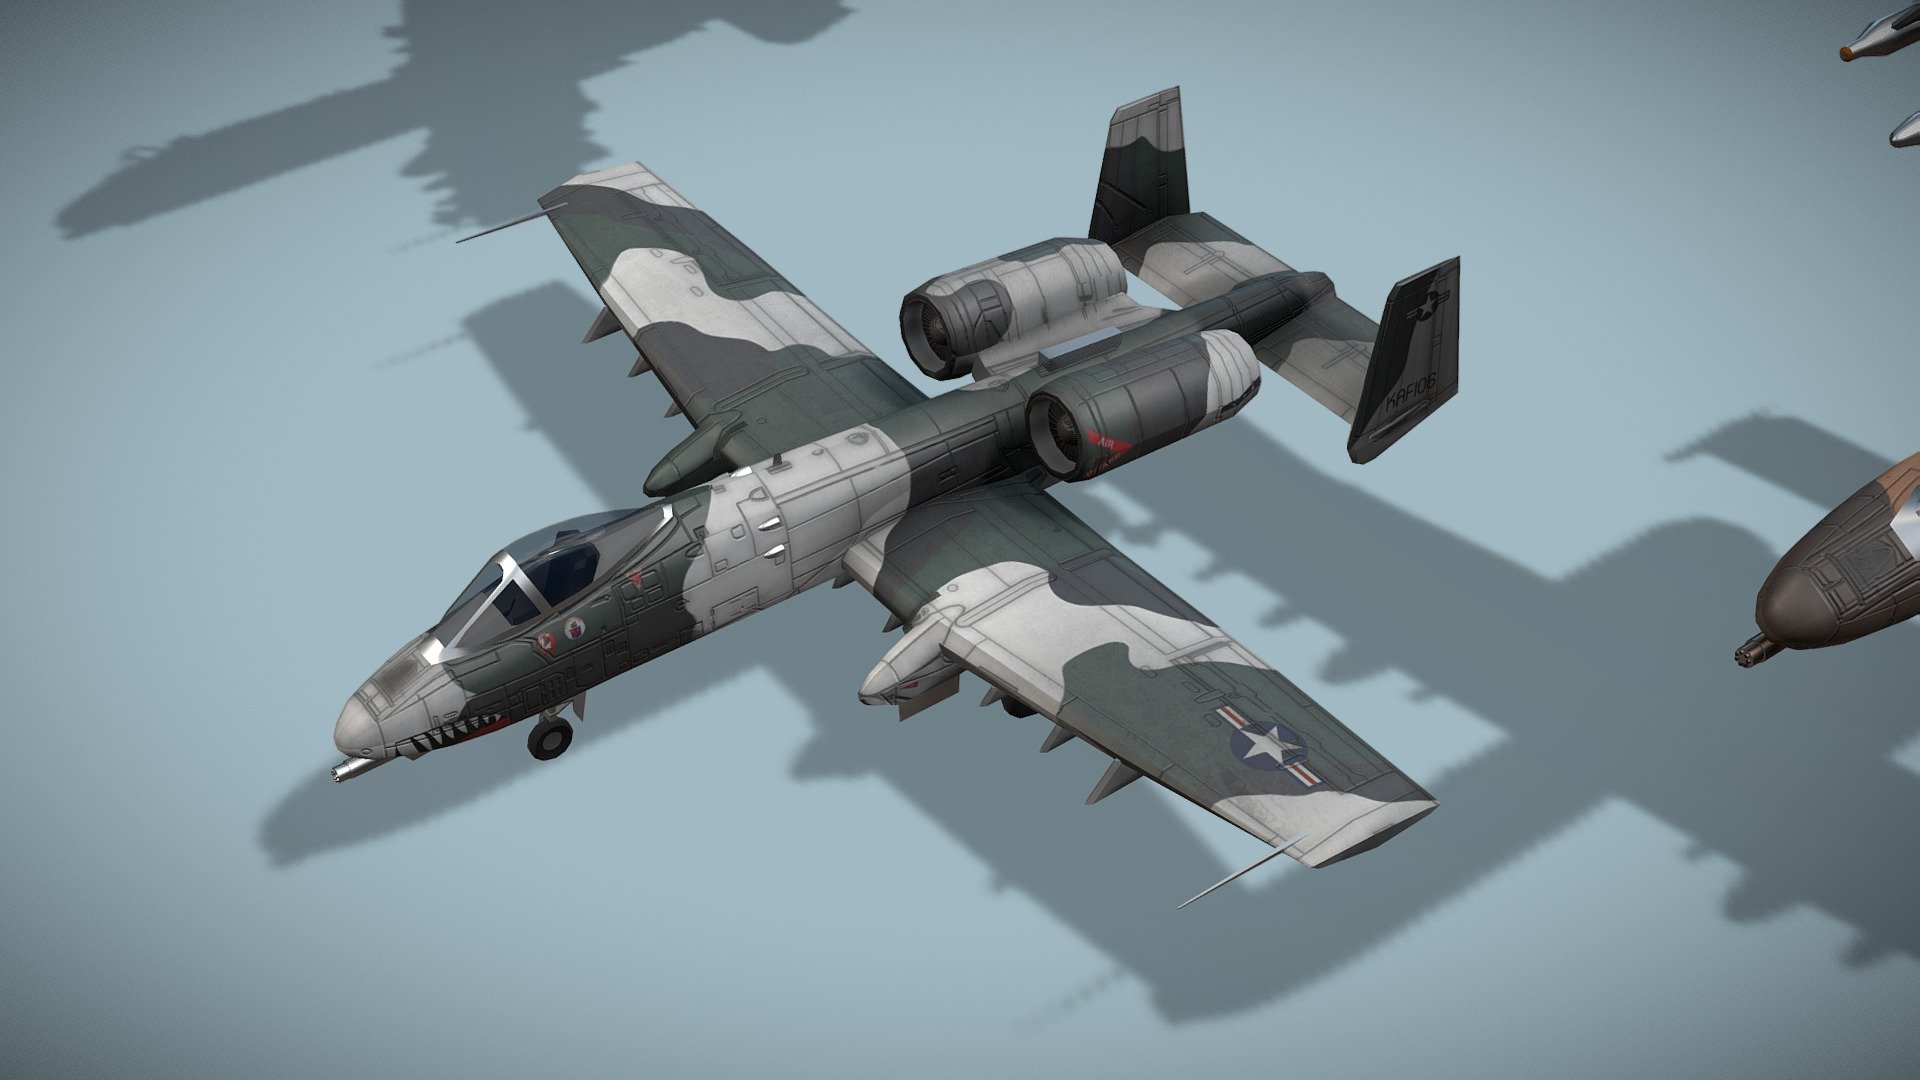 Fairchild Republic A-10 Thunderbolt

Lowpoly model of american jet attack plane.



The Fairchild Republic A-10 Thunderbolt II is a single-seat, twin-turbofan, straight-wing, subsonic attack aircraft developed for the United States Air Force. In service since 1976, it is named for the Republic P-47 Thunderbolt, a World War II-era fighter-bomber effective at attacking ground targets, but commonly referred to as the Warthog. The A-10 was designed to provide close air support to friendly ground troops by attacking armored vehicles, tanks, and other enemy forces. Its secondary mission is to direct other aircraft in attacks on ground targets, a role called forward air controller-airborne; aircraft used primarily in this role are designated OA-10.



1 standing version and 2 flying versions i set

Model has bump map, roughness map and 3 x diffuse textures.



Check also my other aircrafts and cars.

Patreon with monthly free model - Fairchild Republic A-10 Thunderbolt attack plane - Buy Royalty Free 3D model by NETRUNNER_pl 3d model